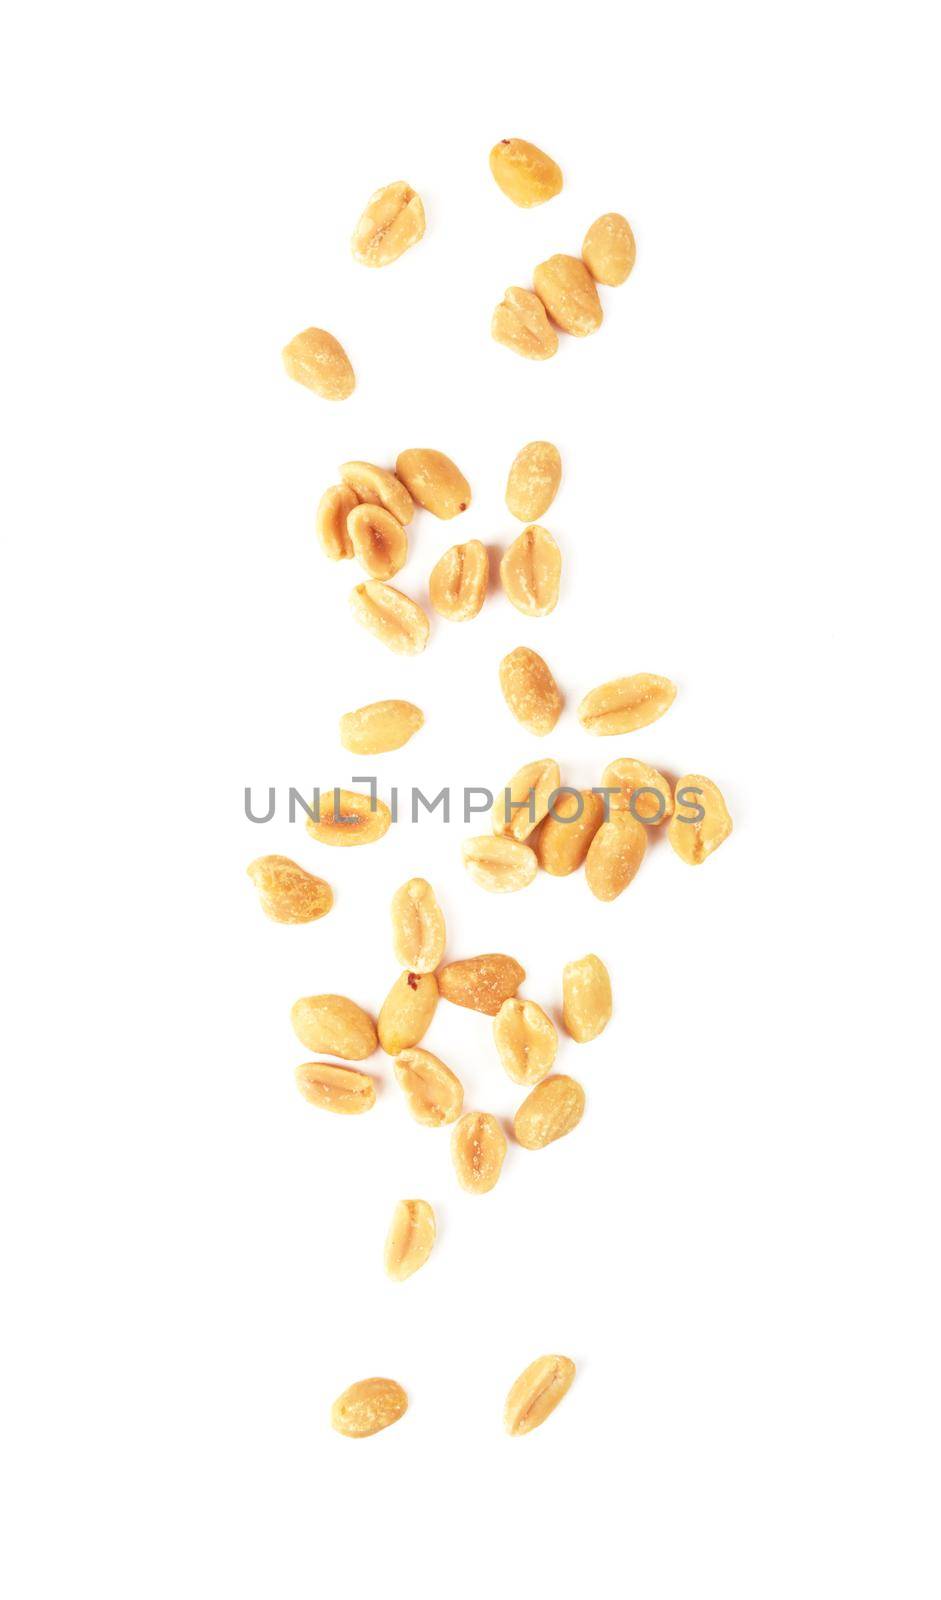 Salted peanuts isolated by pioneer111